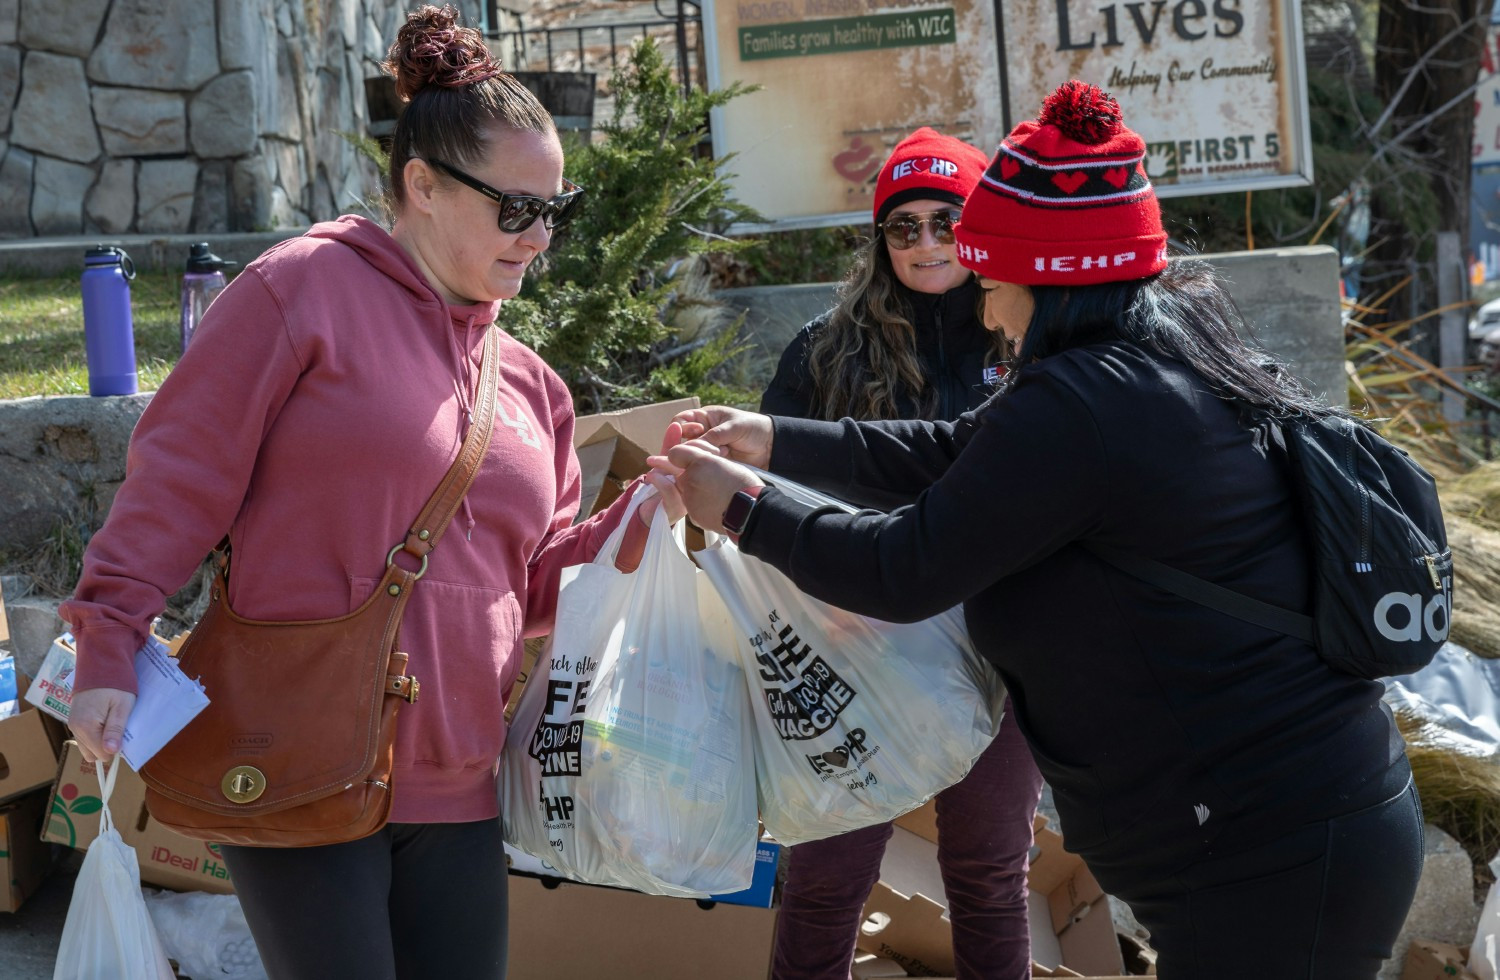 When record -breaking snowfall isolated the mountain town of Crestline, Calif., IEHP provided fresh food items and hope.